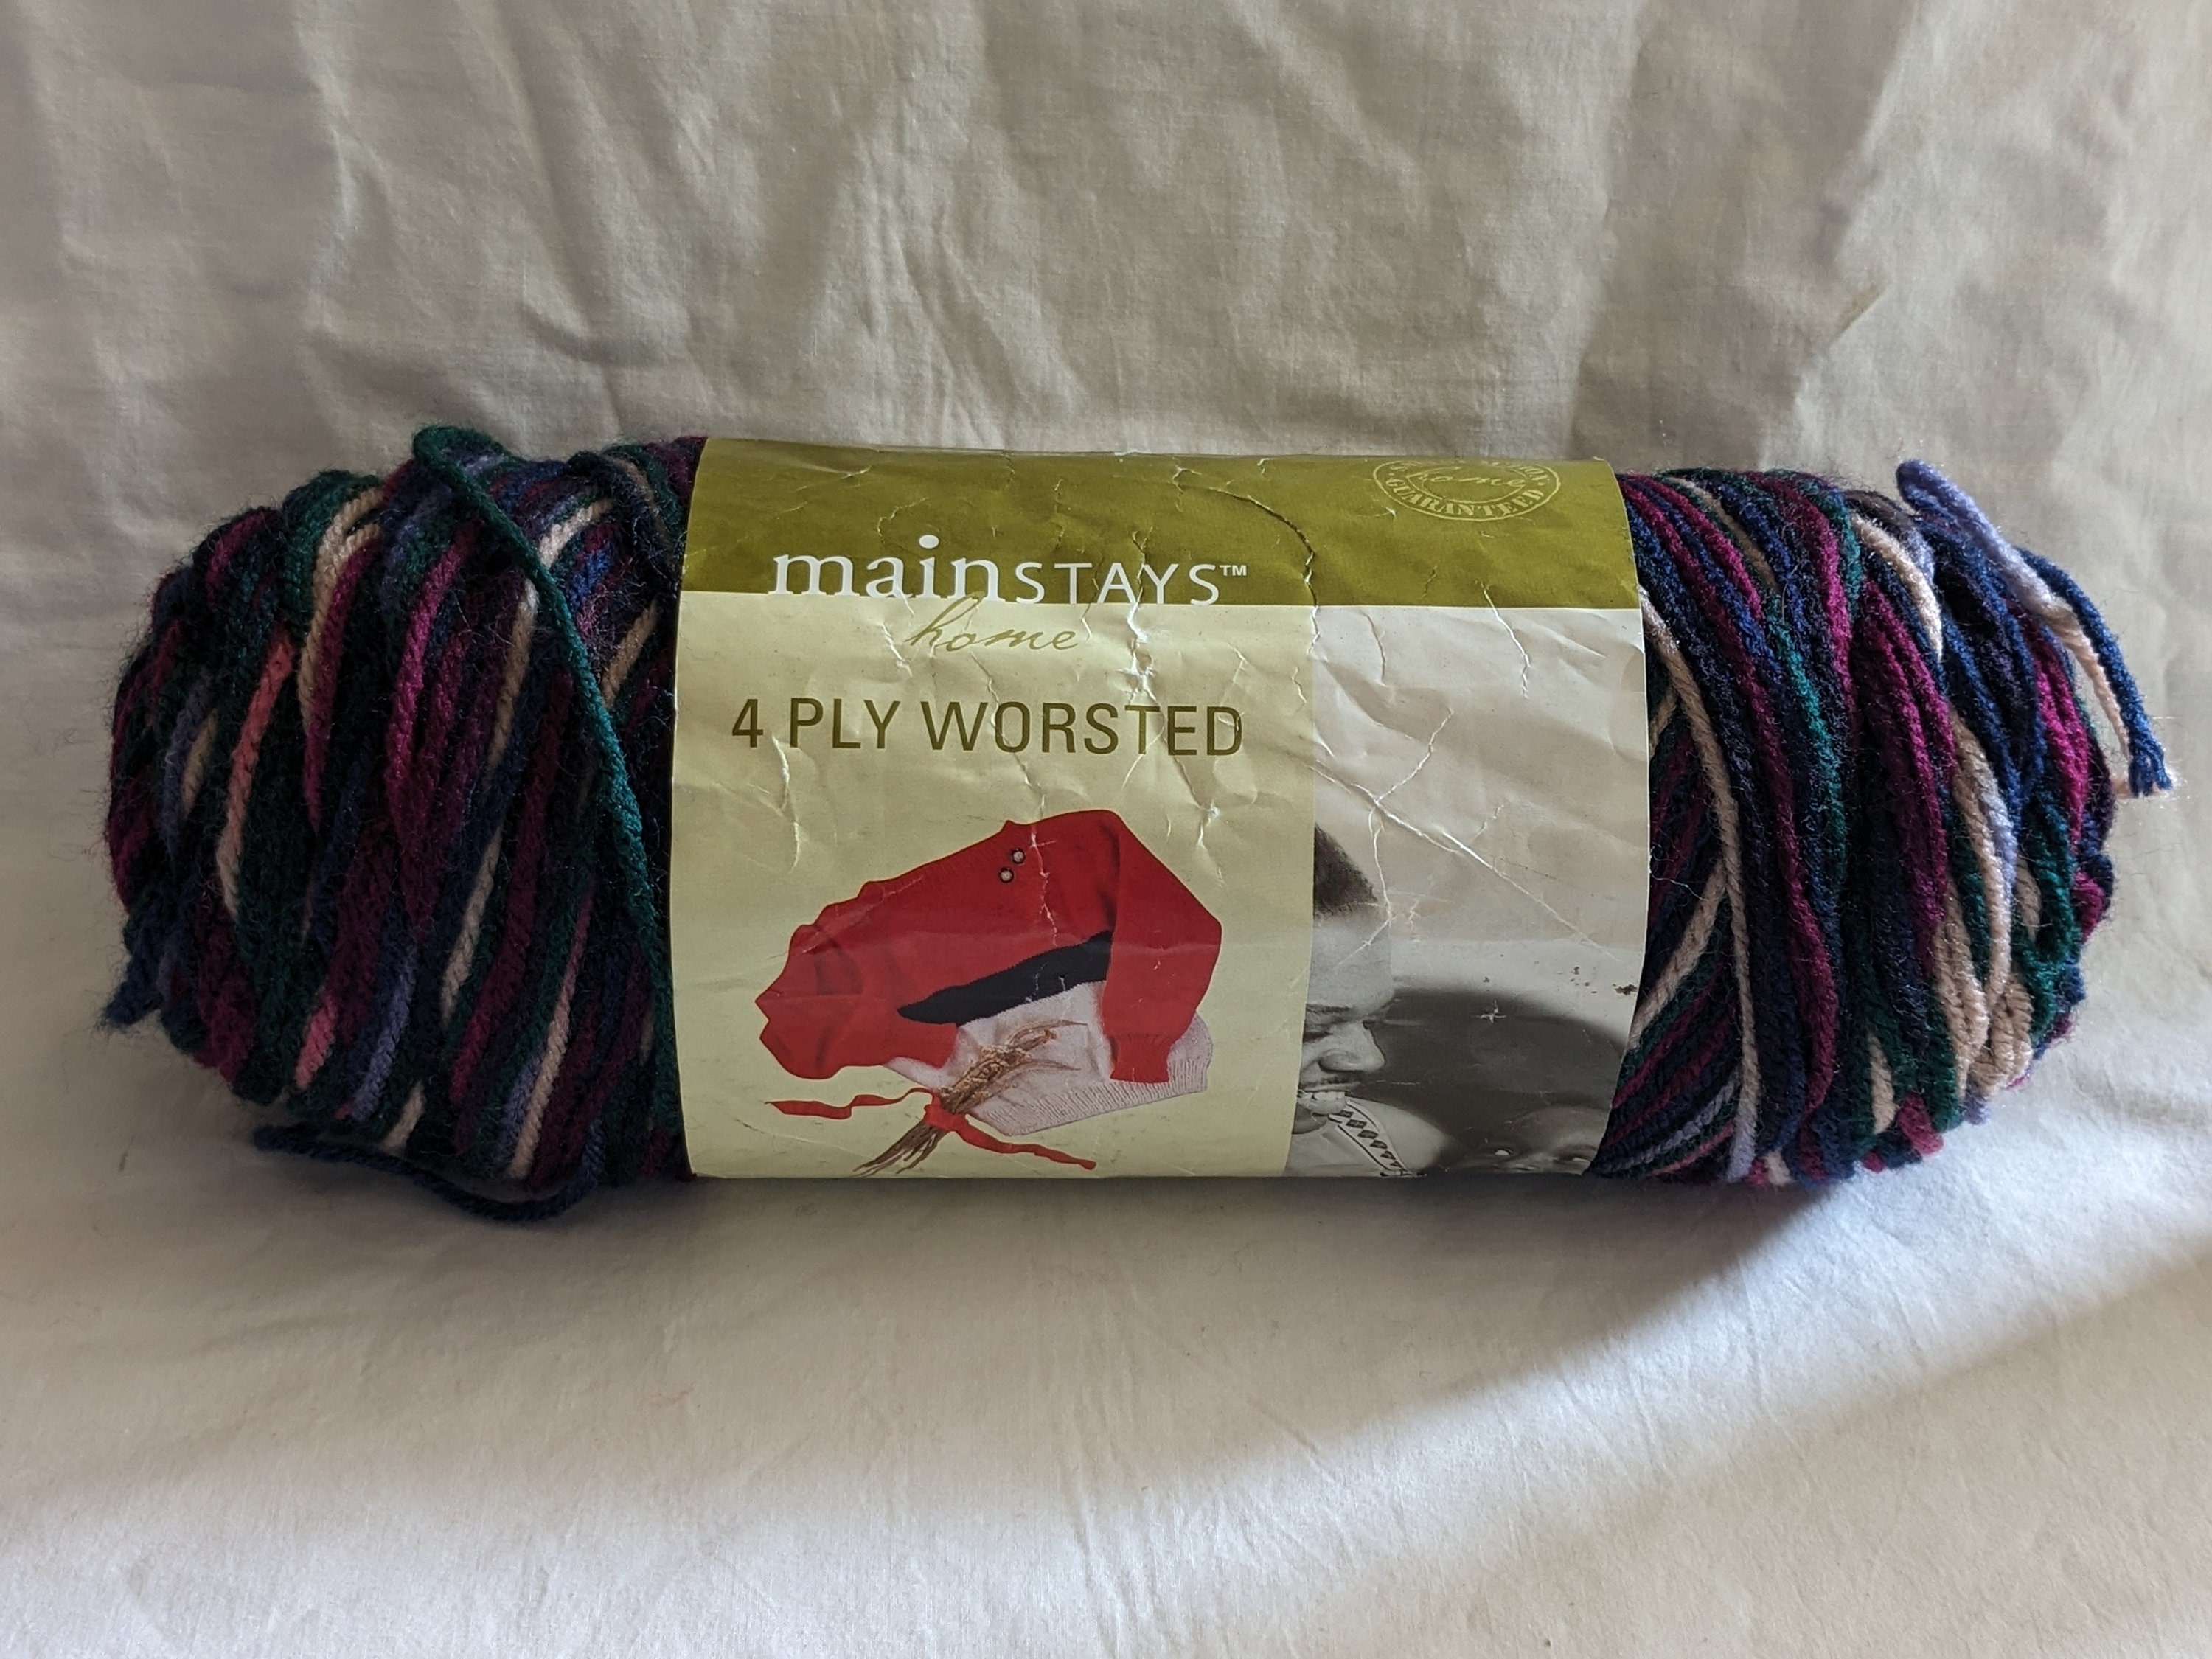 Red Heart Boutique Unforgettable Rainforest Yarn - 3 Pack of 100g/3.5oz -  Acrylic - 4 Medium (Worsted) - 270 Yards - Knitting, Crocheting & Crafts